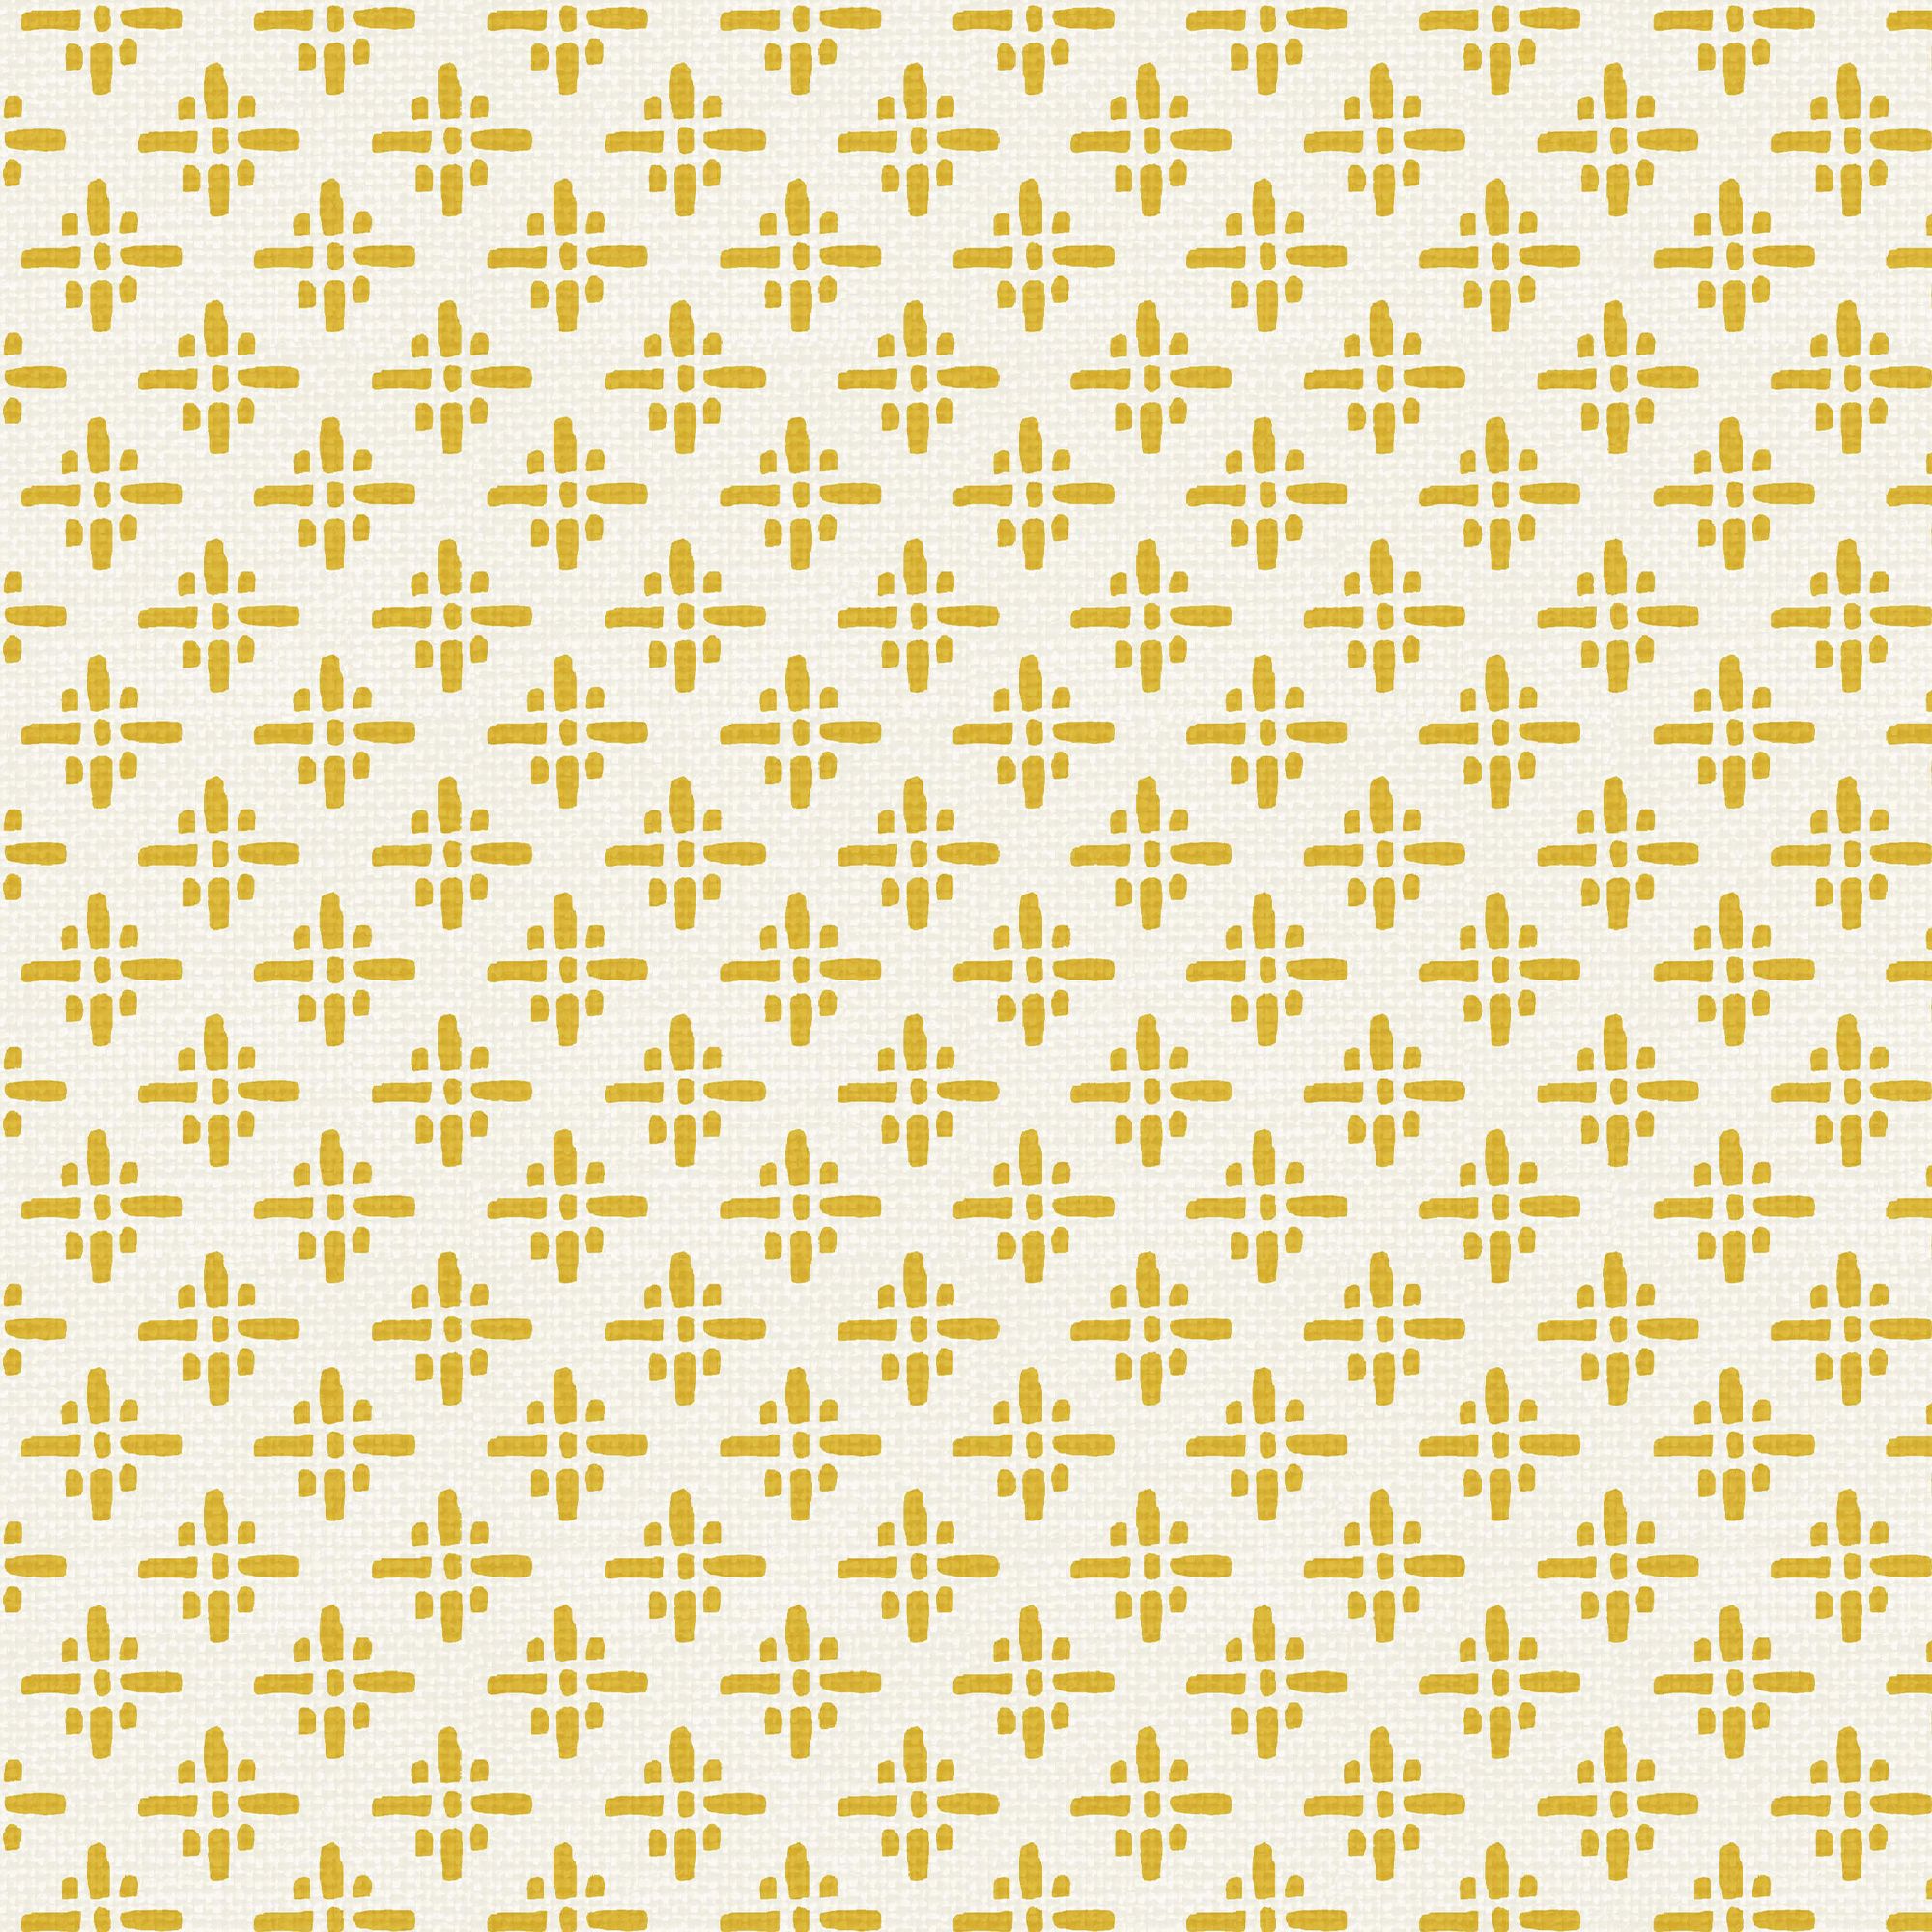 Joules Yellow Geometric Smooth Wallpaper